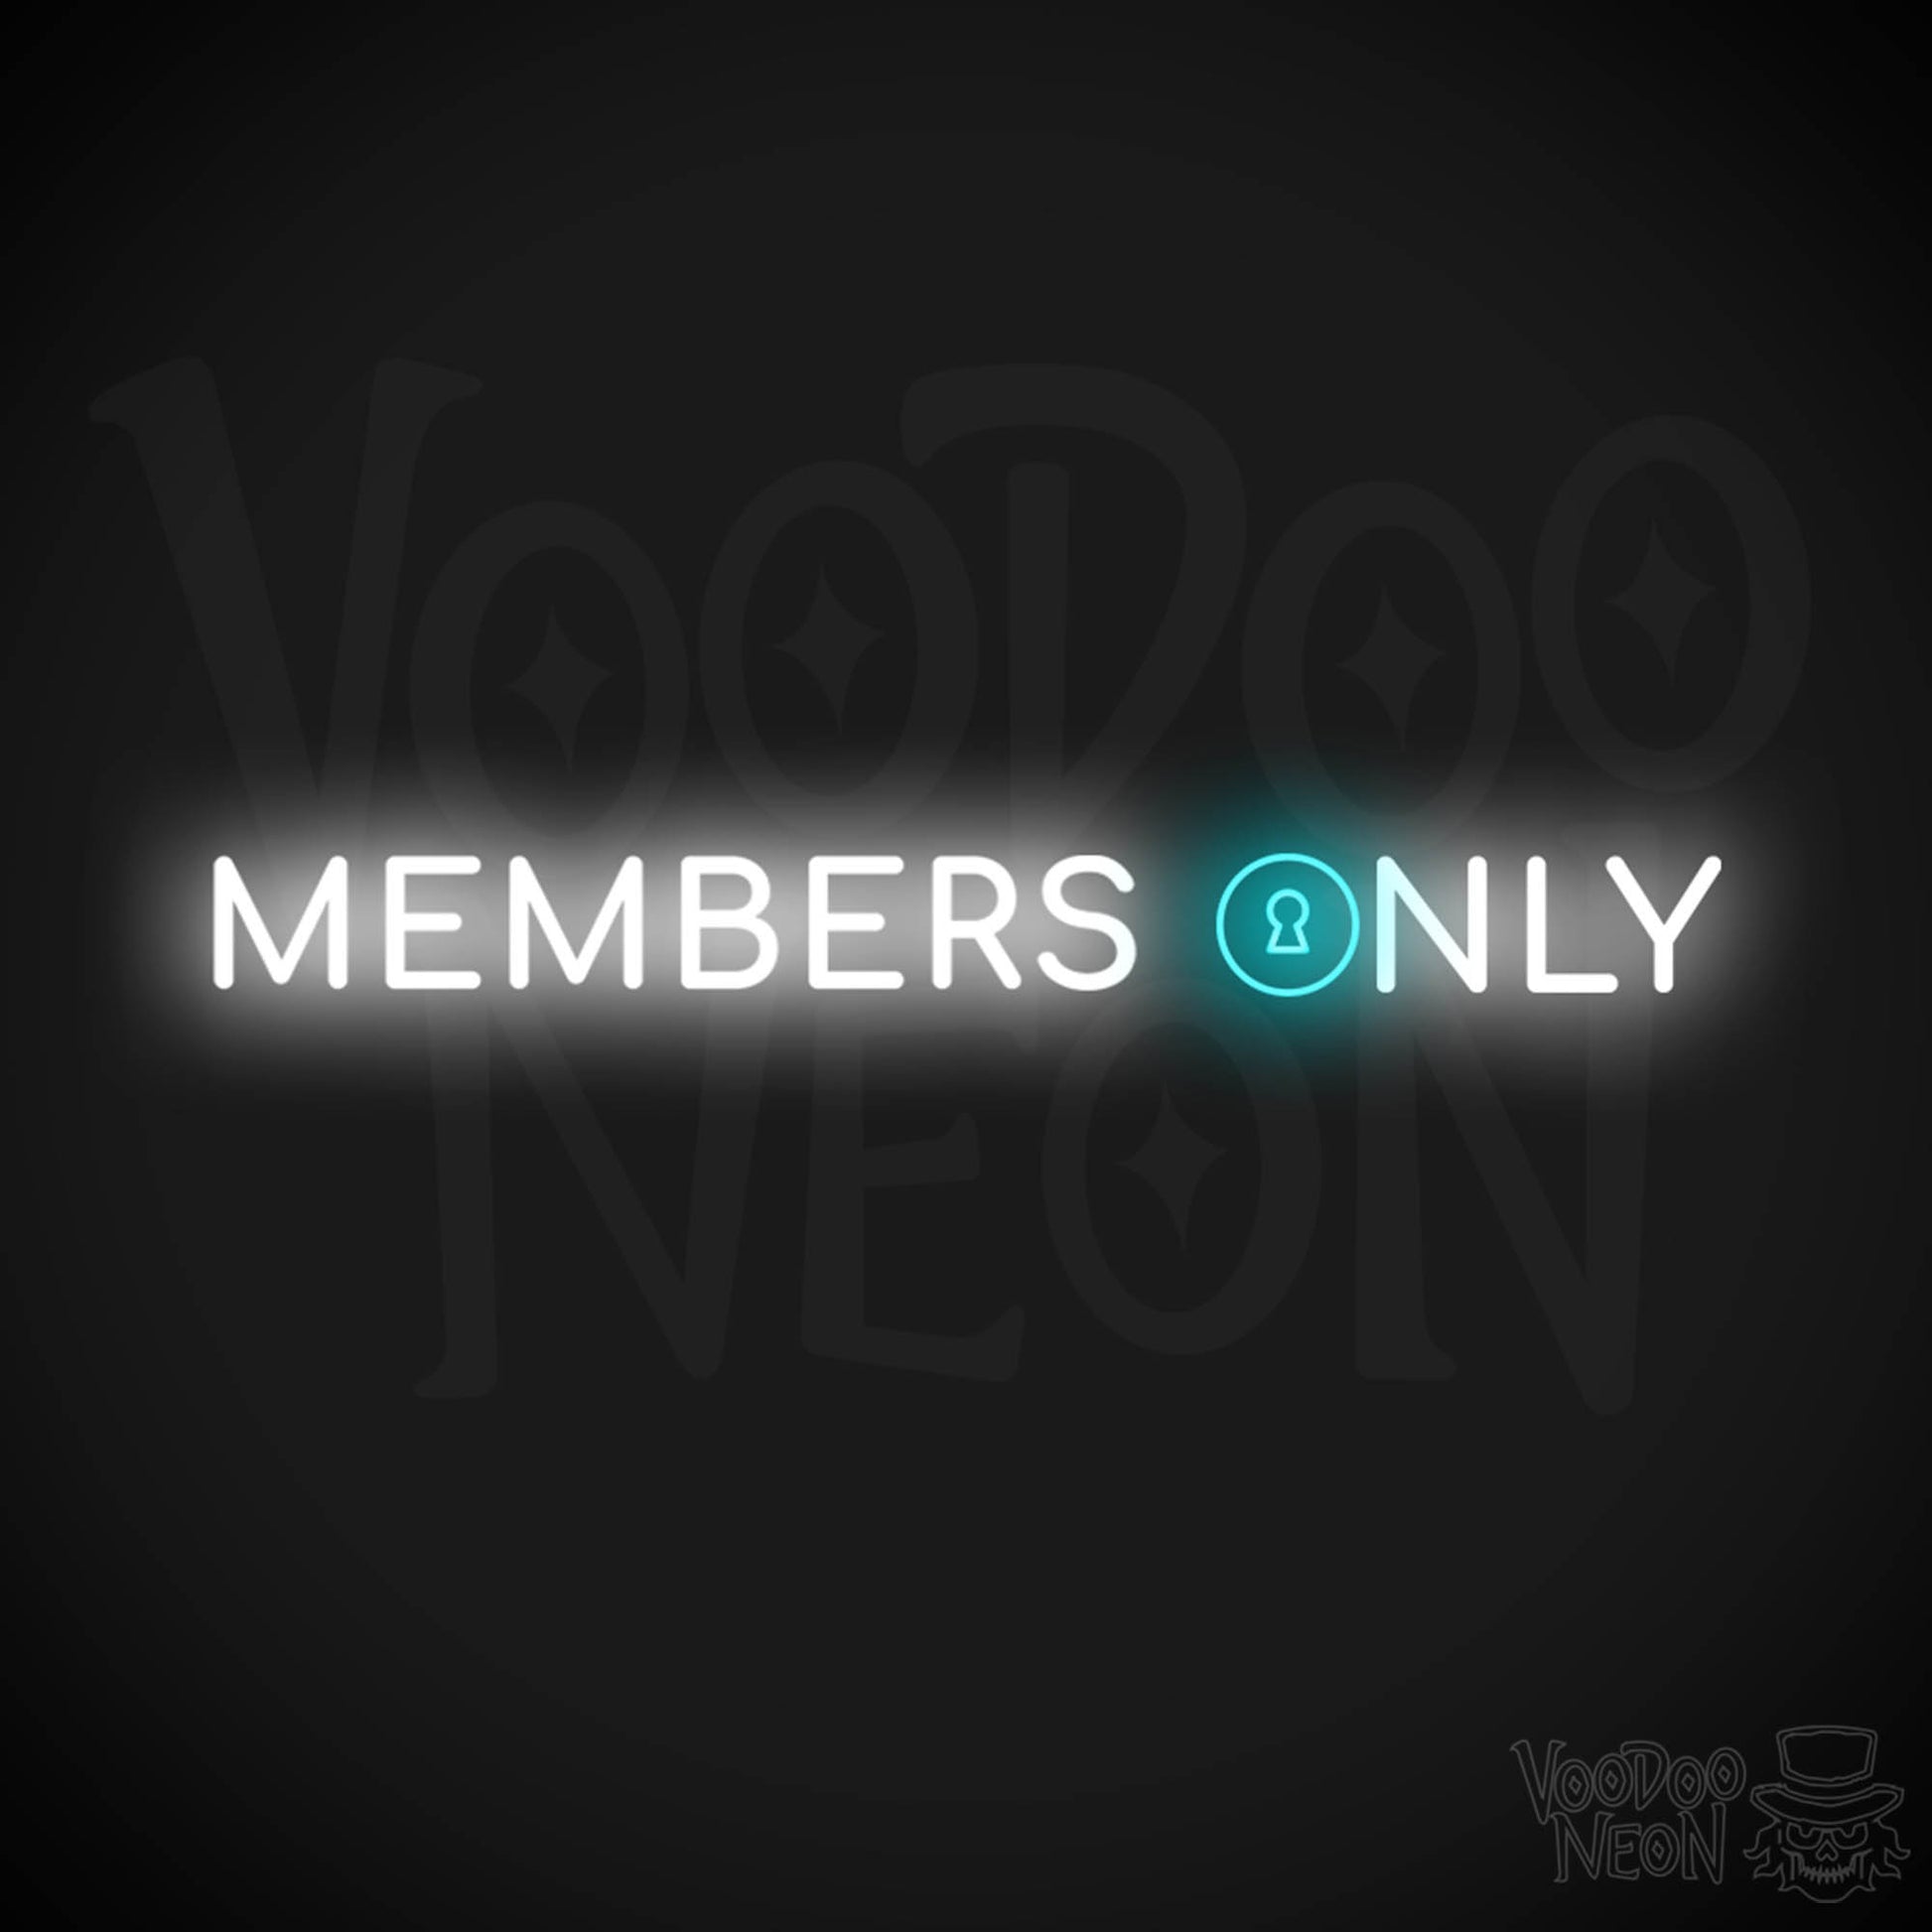 Members Only Neon Sign - Neon Members Only Sign - Color Multi-Color